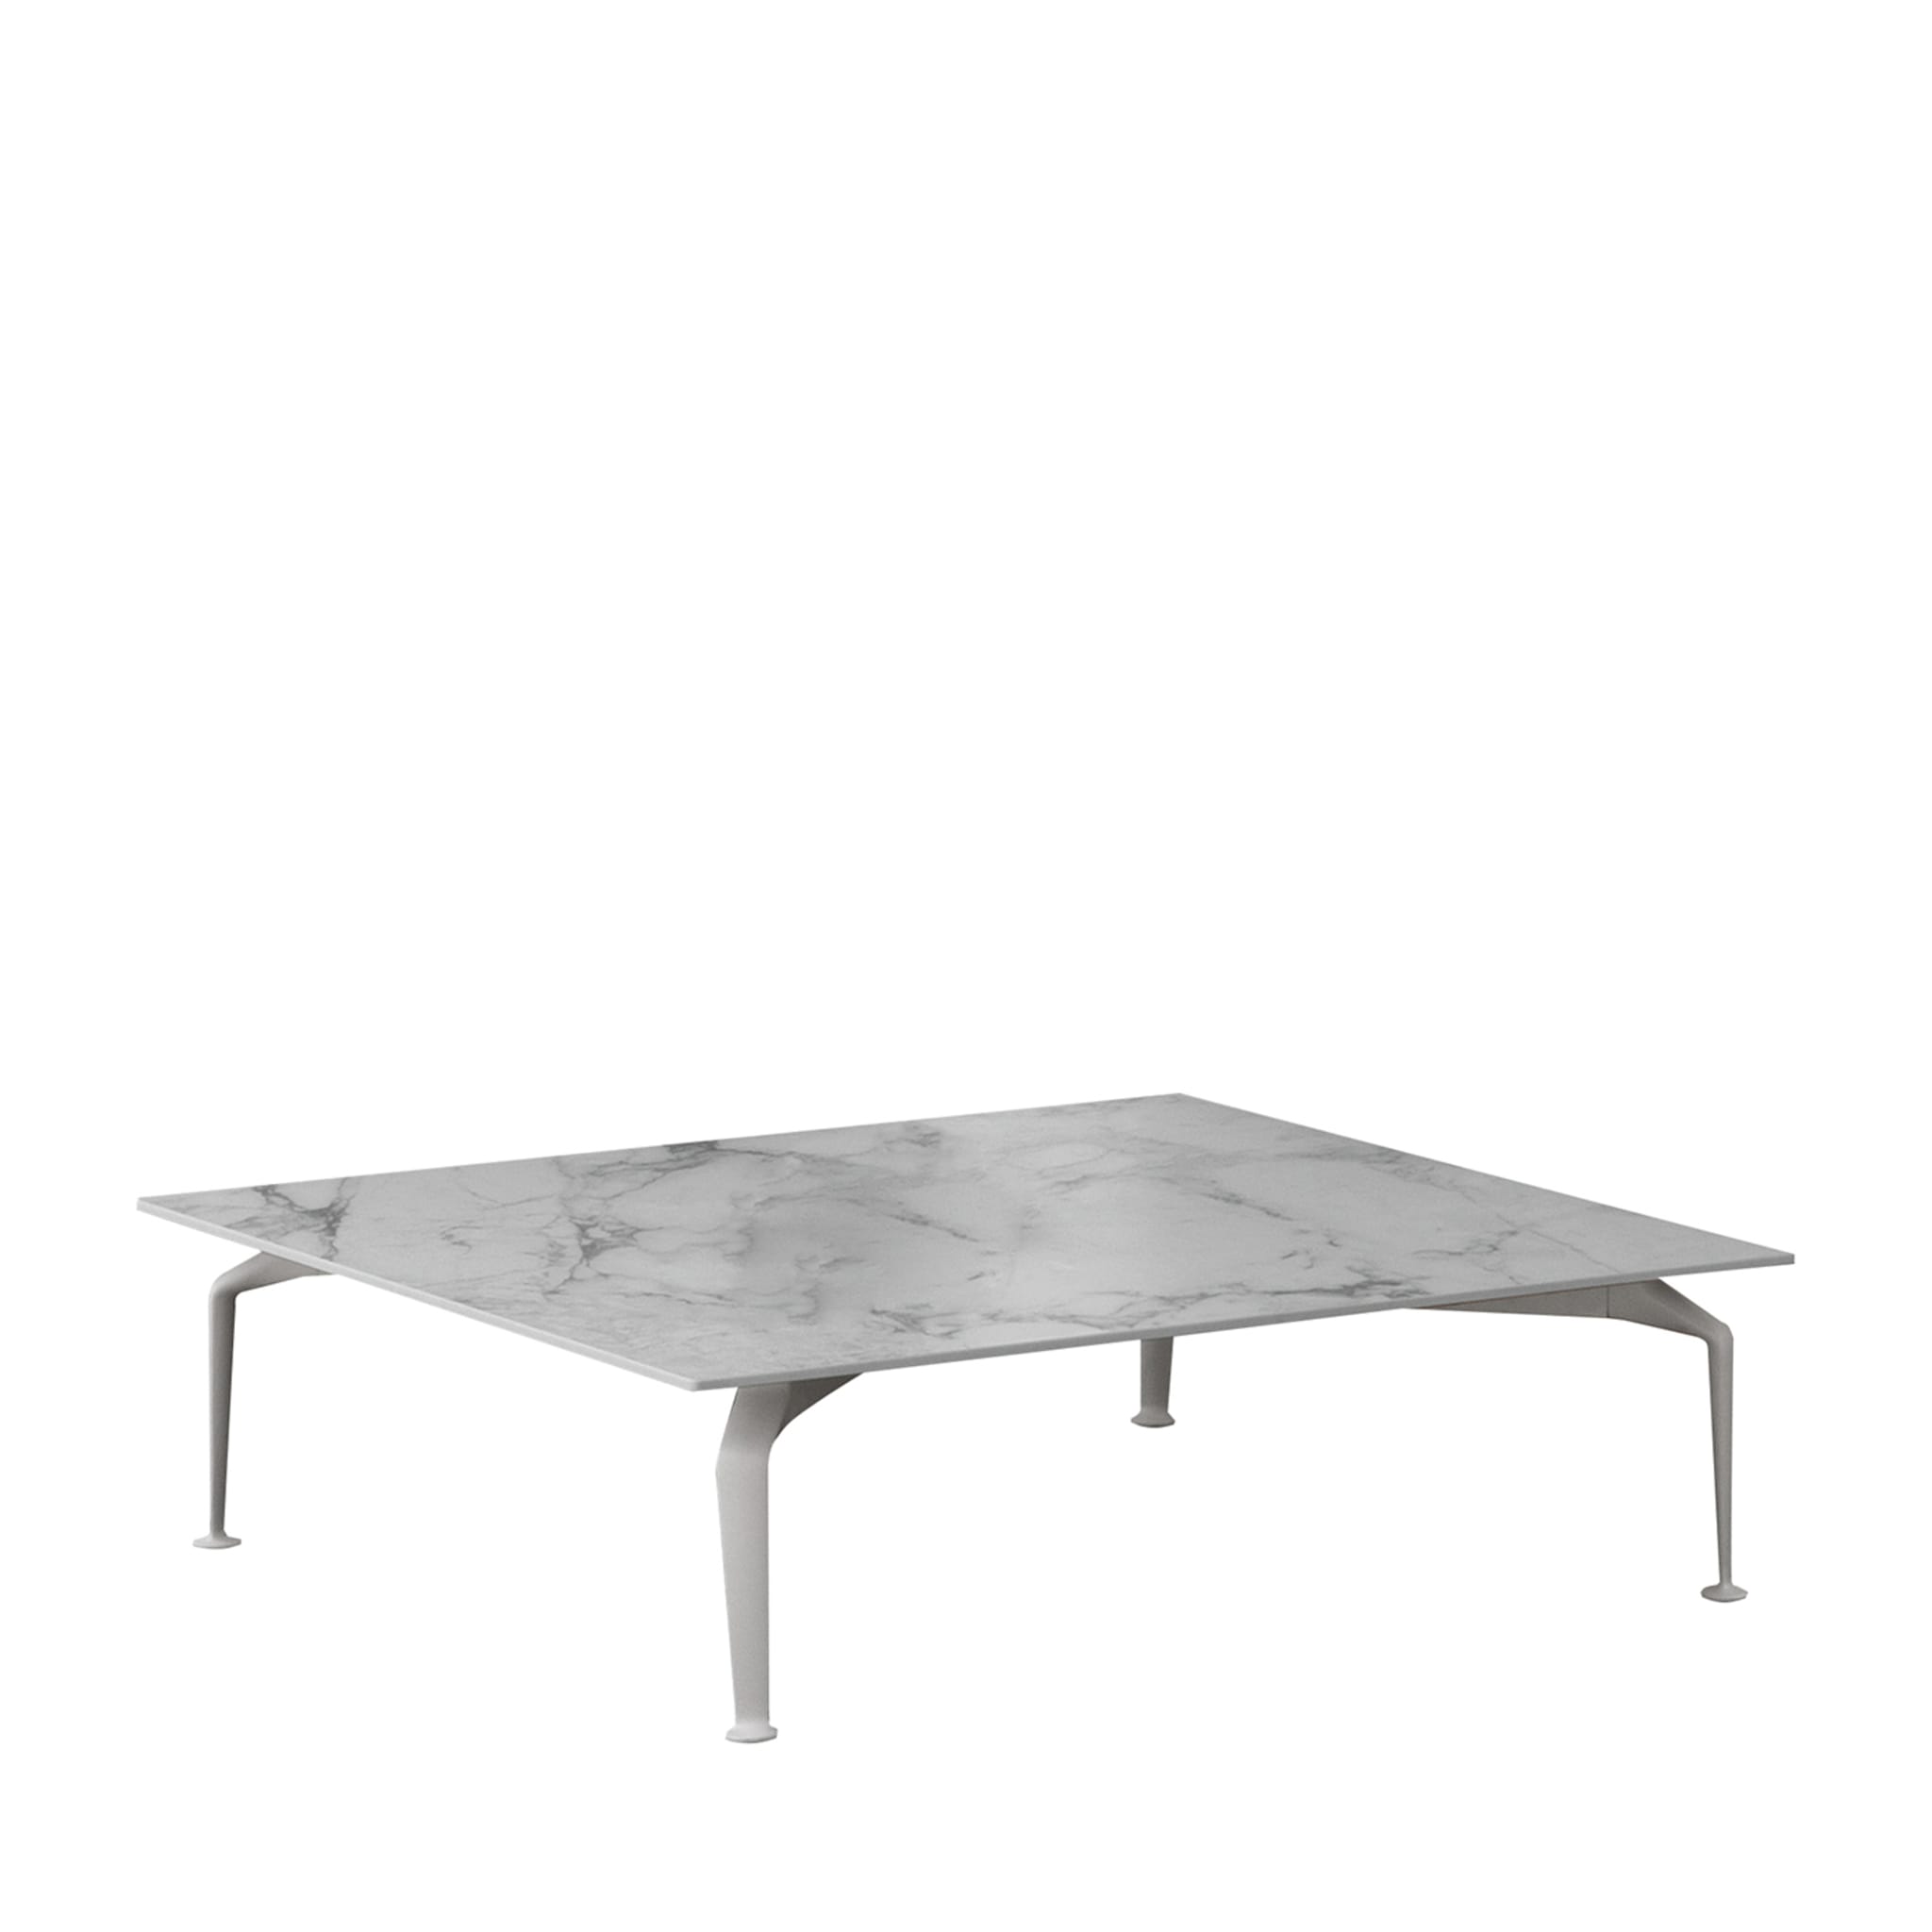 Cruise Alu Large Coffee Table by Ludovica & Roberto Palomba - Main view